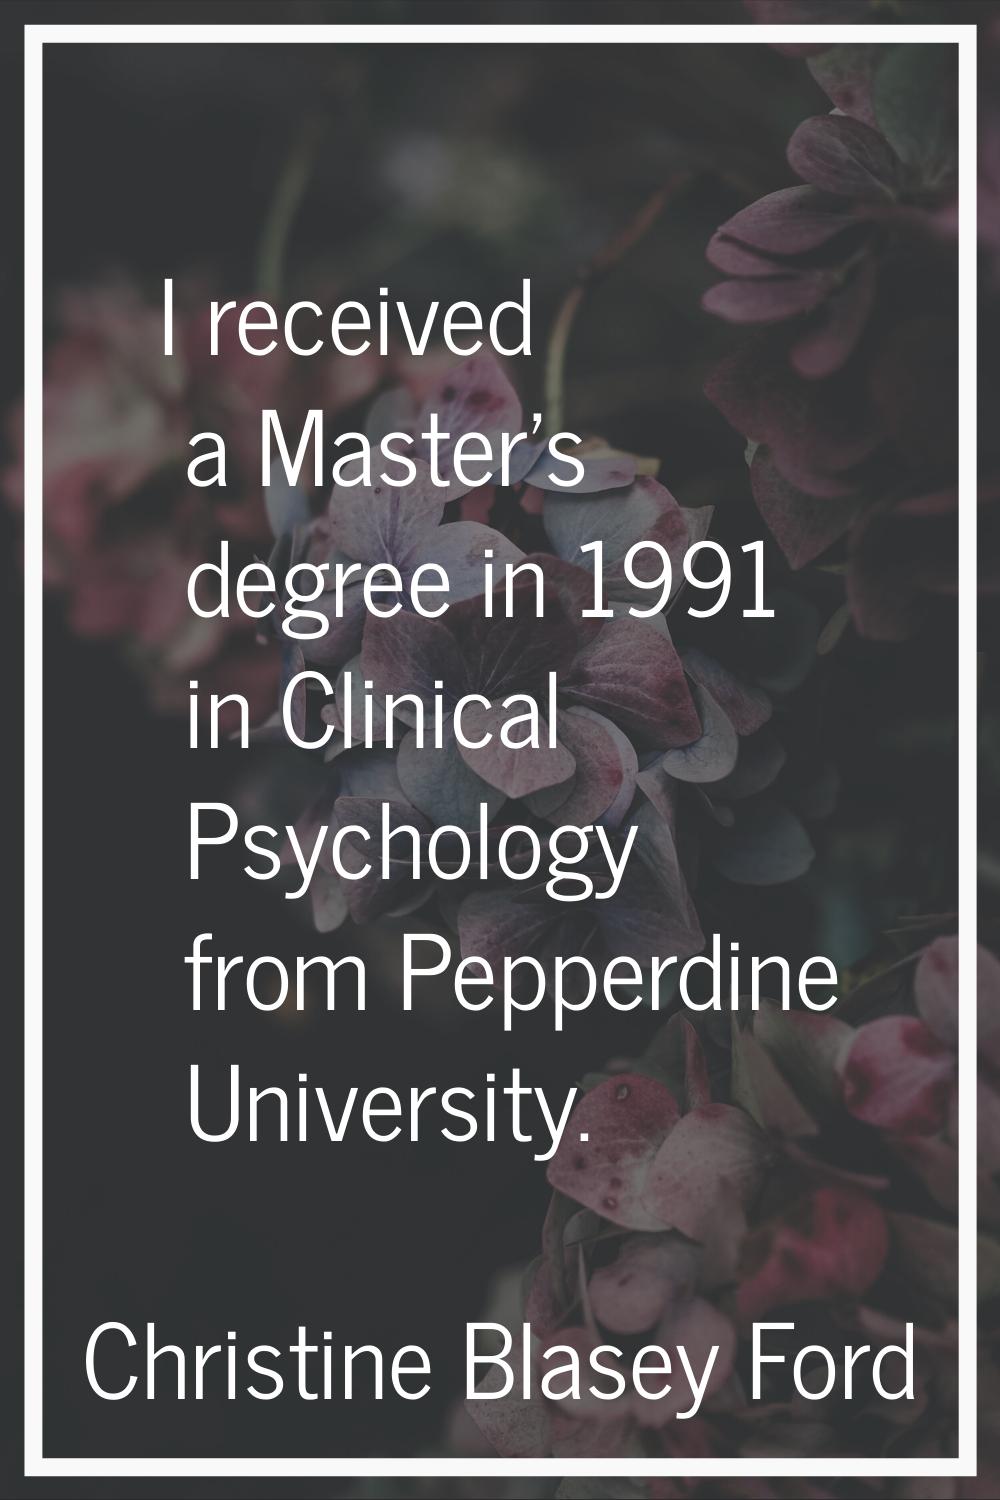 I received a Master's degree in 1991 in Clinical Psychology from Pepperdine University.